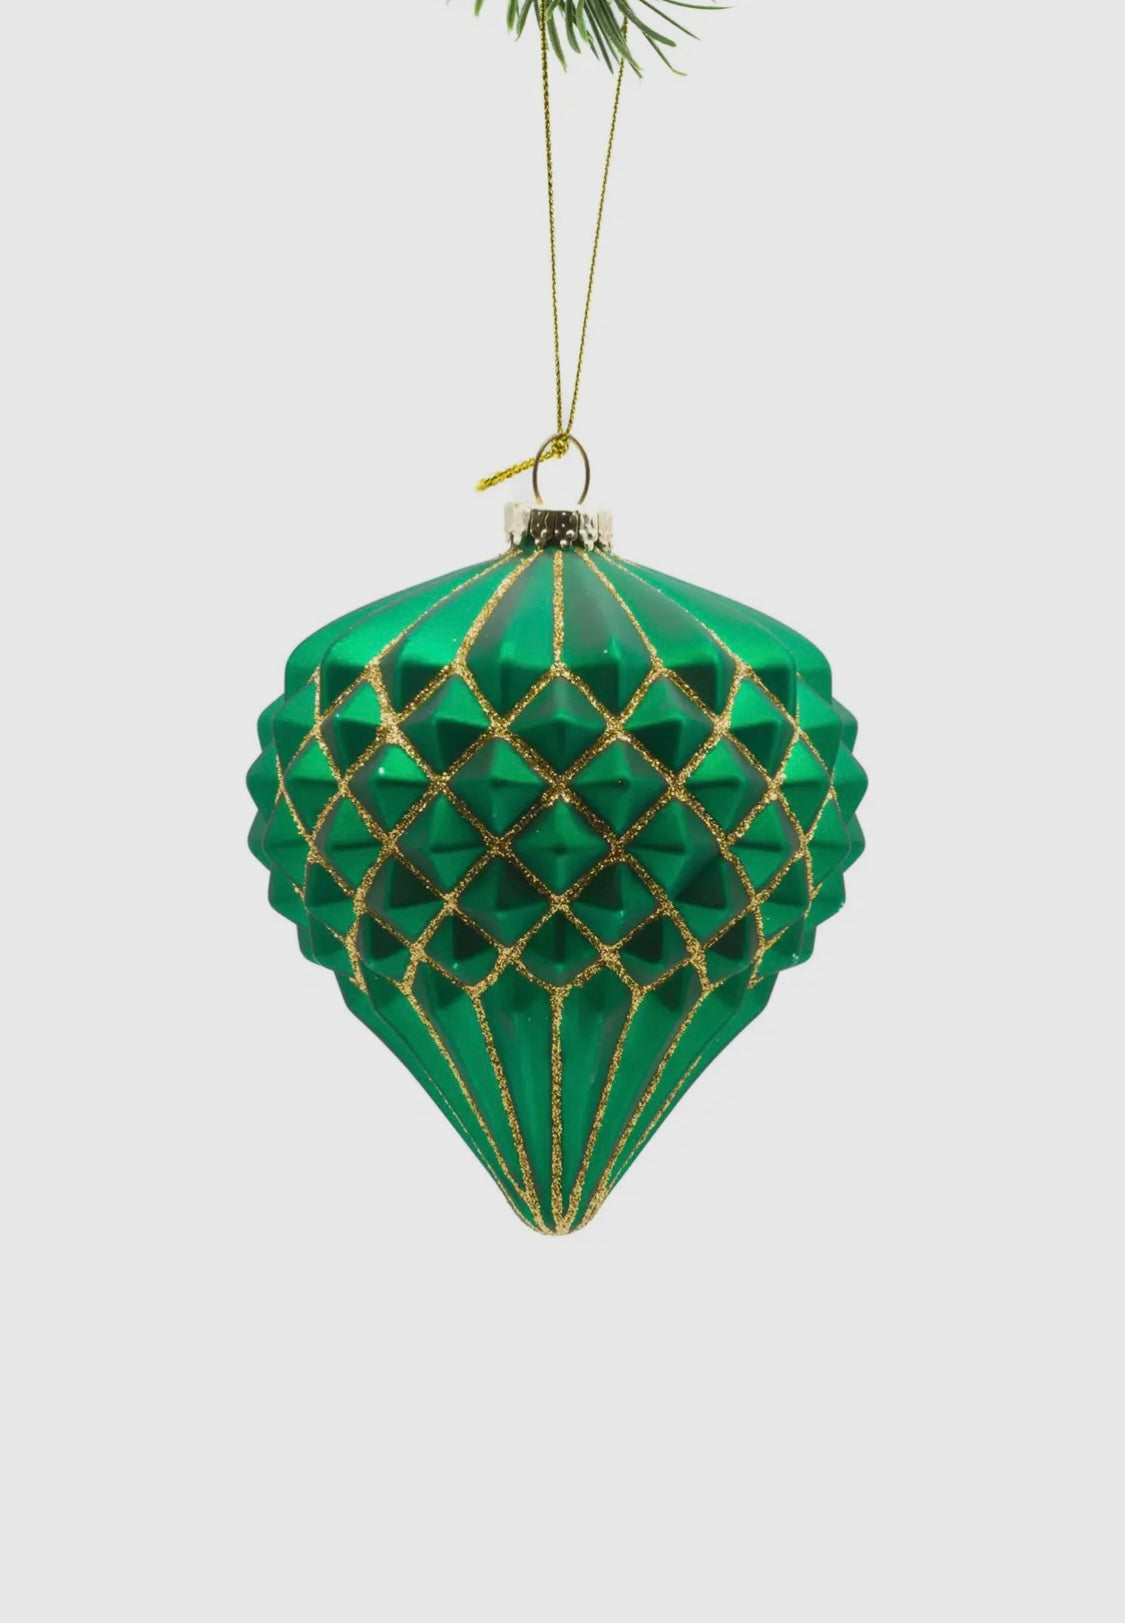 Green with Gold accents Glass Hanging Ornament